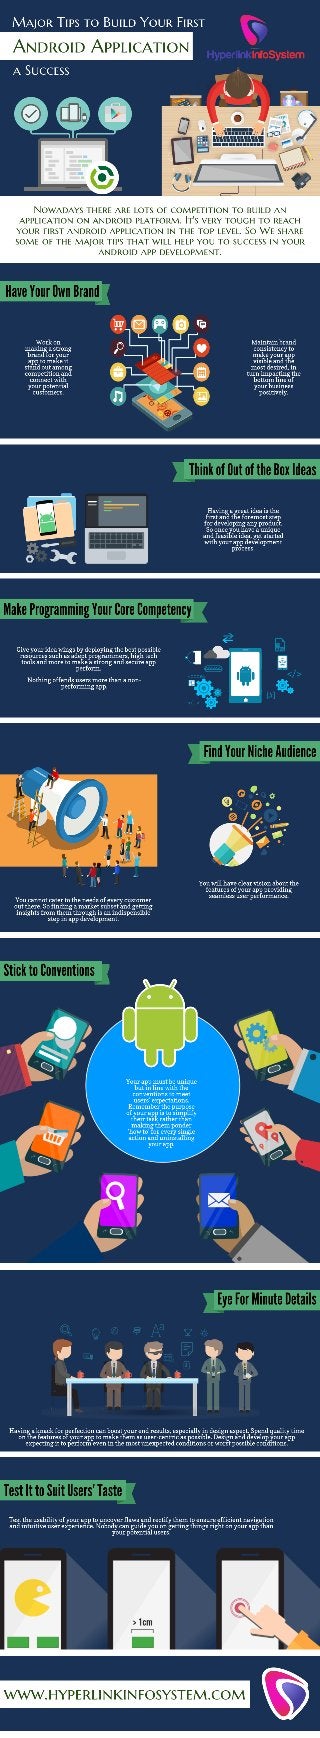 Major Tips to Build Your First Android Application a Success